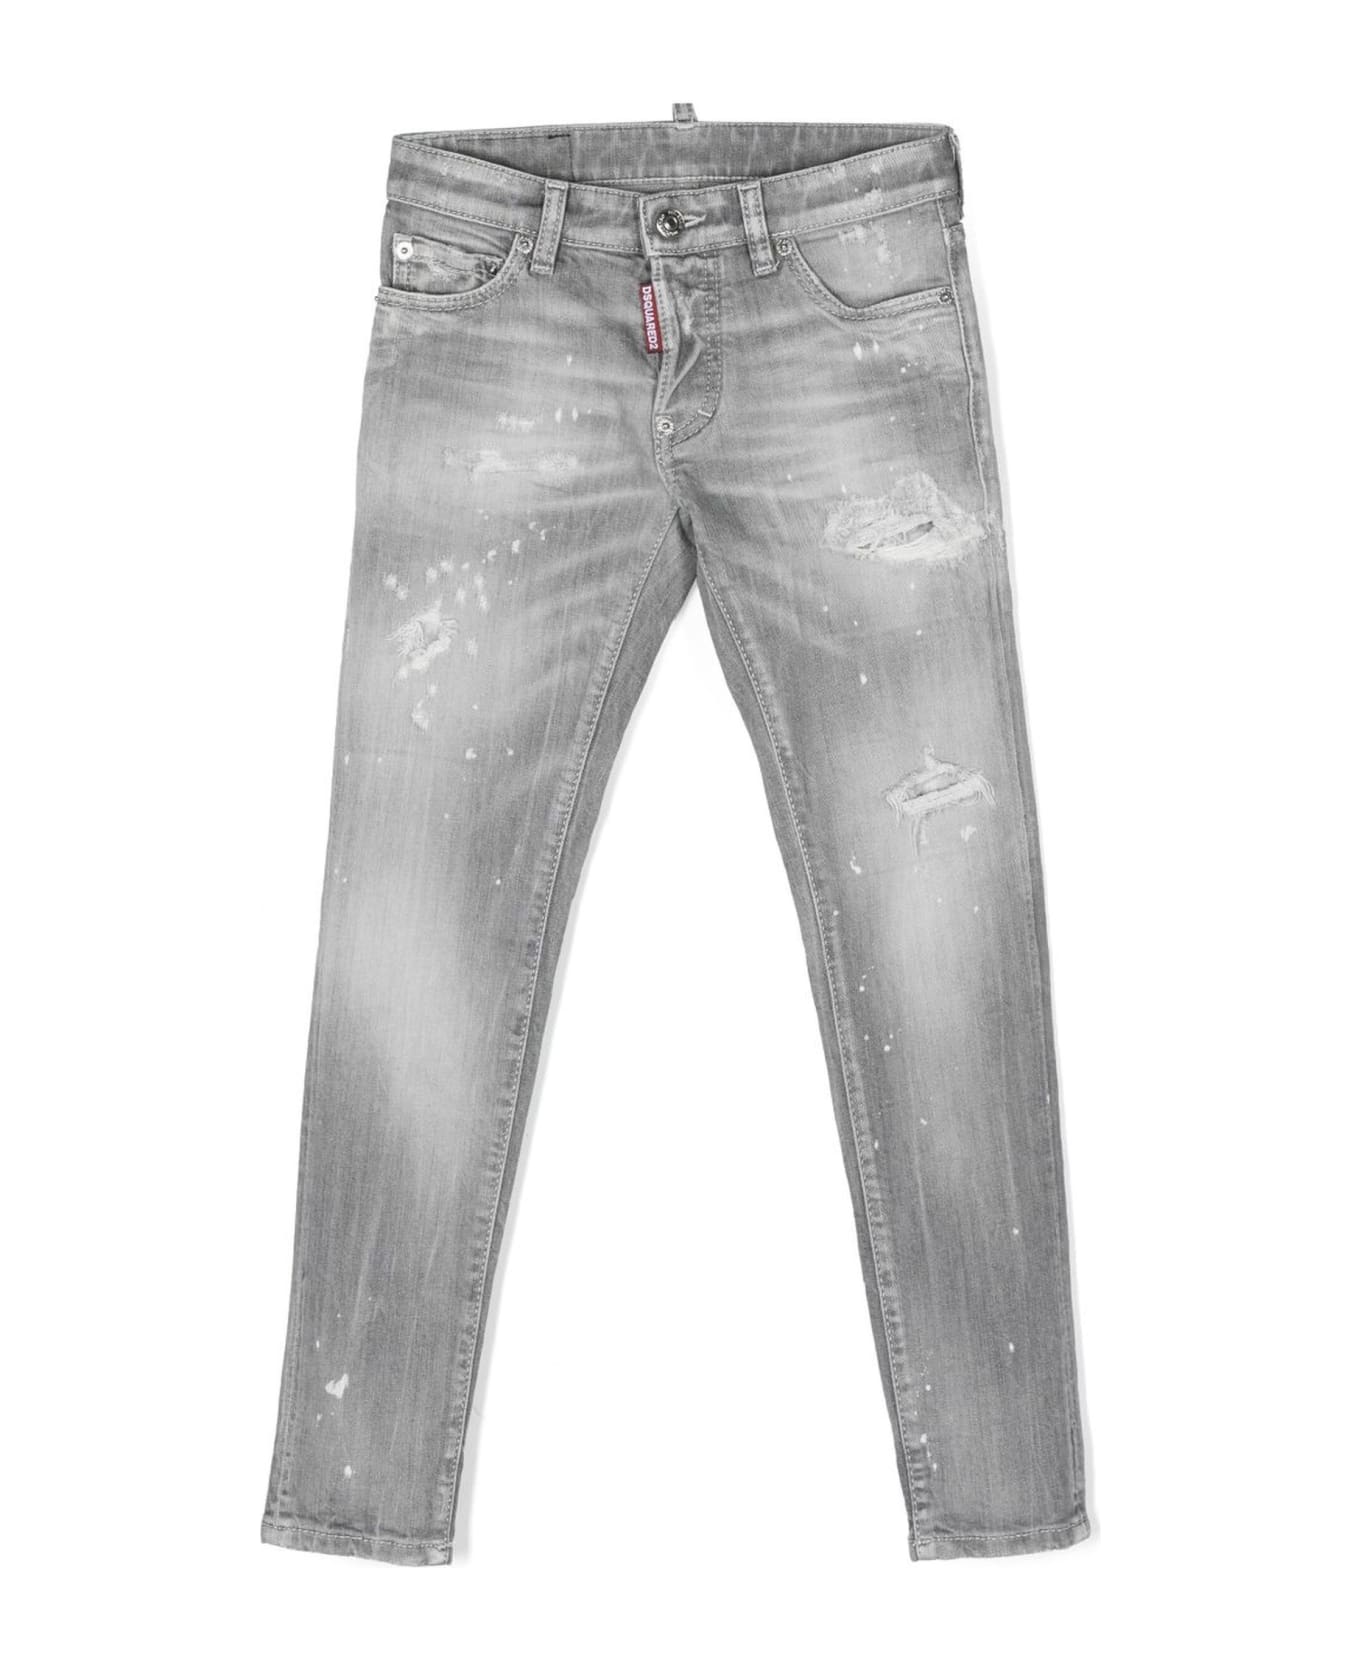 Dsquared2 Jeans Grey - Grey ボトムス